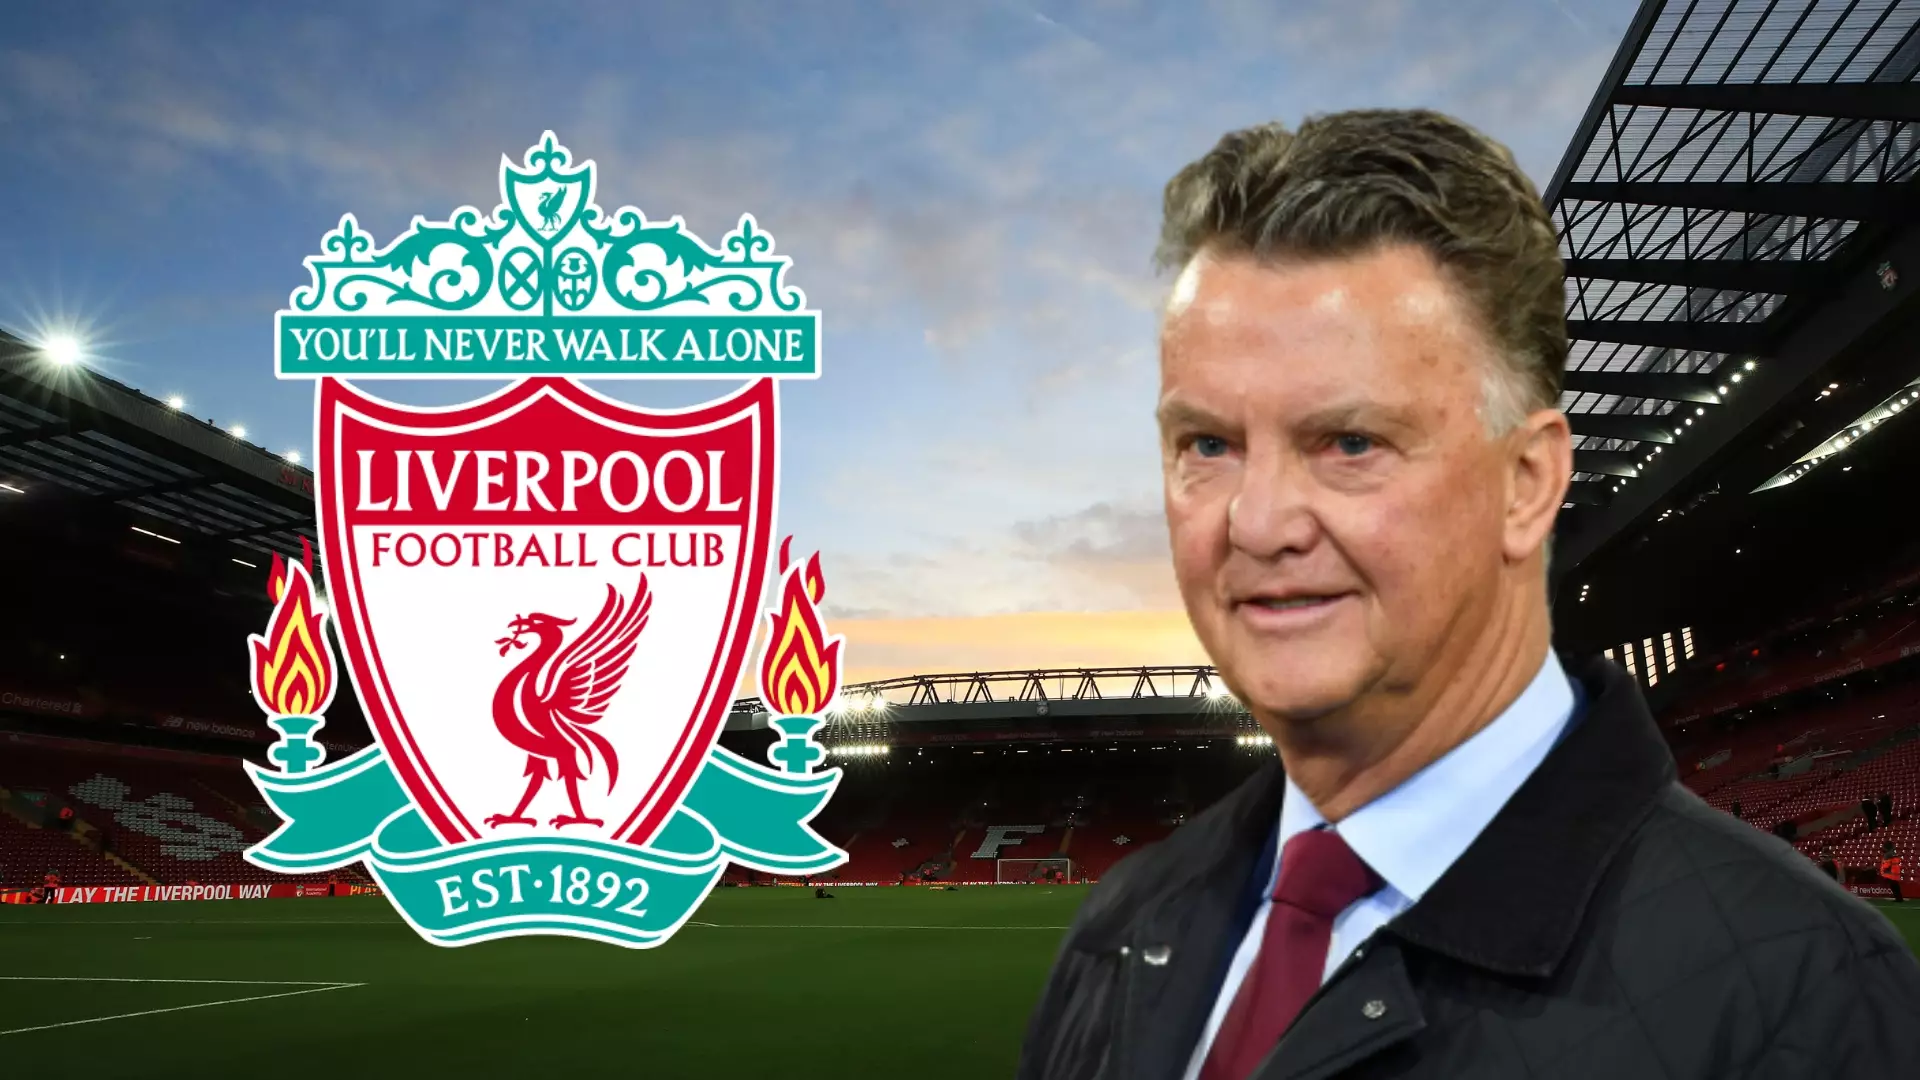 Van Gaal Says Merson Is ‘Not Normal’ After Absurd Claim On Liverpool's Champions League Campaign